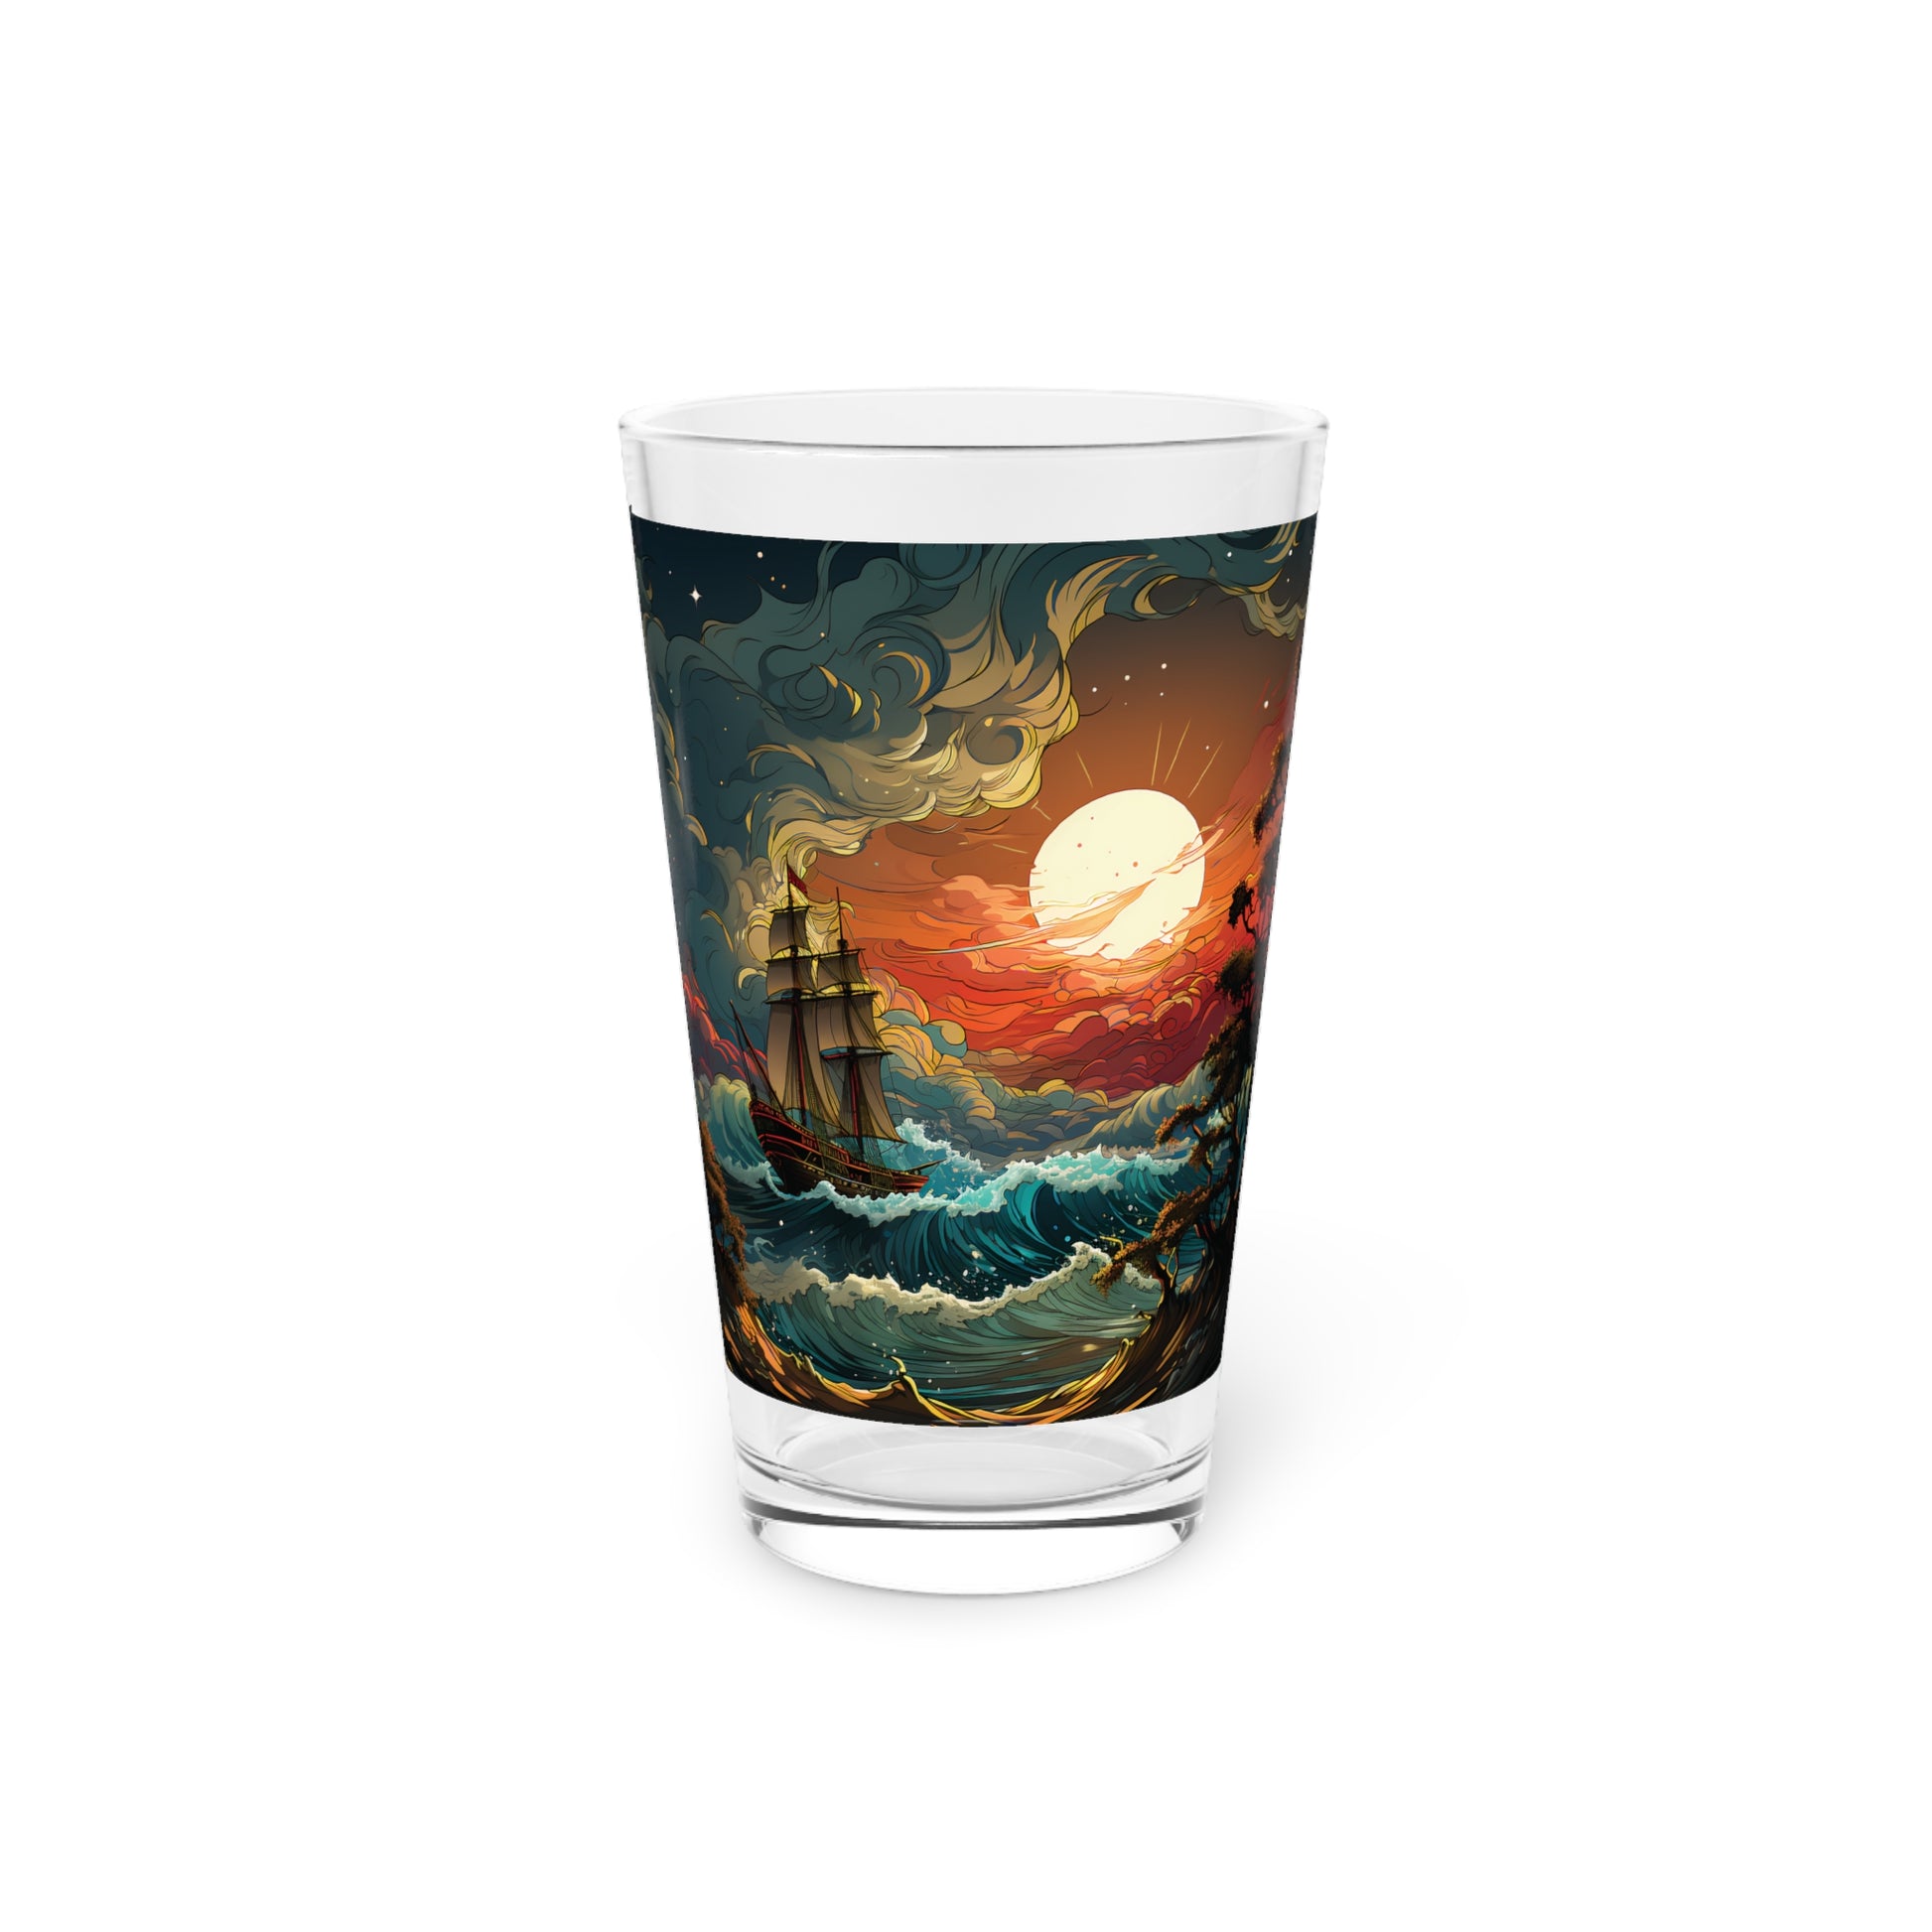 Explore the mystic allure of our Tarot Card Style Ocean Waves Pint Glass (16oz) - Waves Design #030. Exclusively crafted by Stashbox.ai, this glass captures the essence of tarot with ocean waves and a sailing ship. Dive into the mystic with this unique glassware.